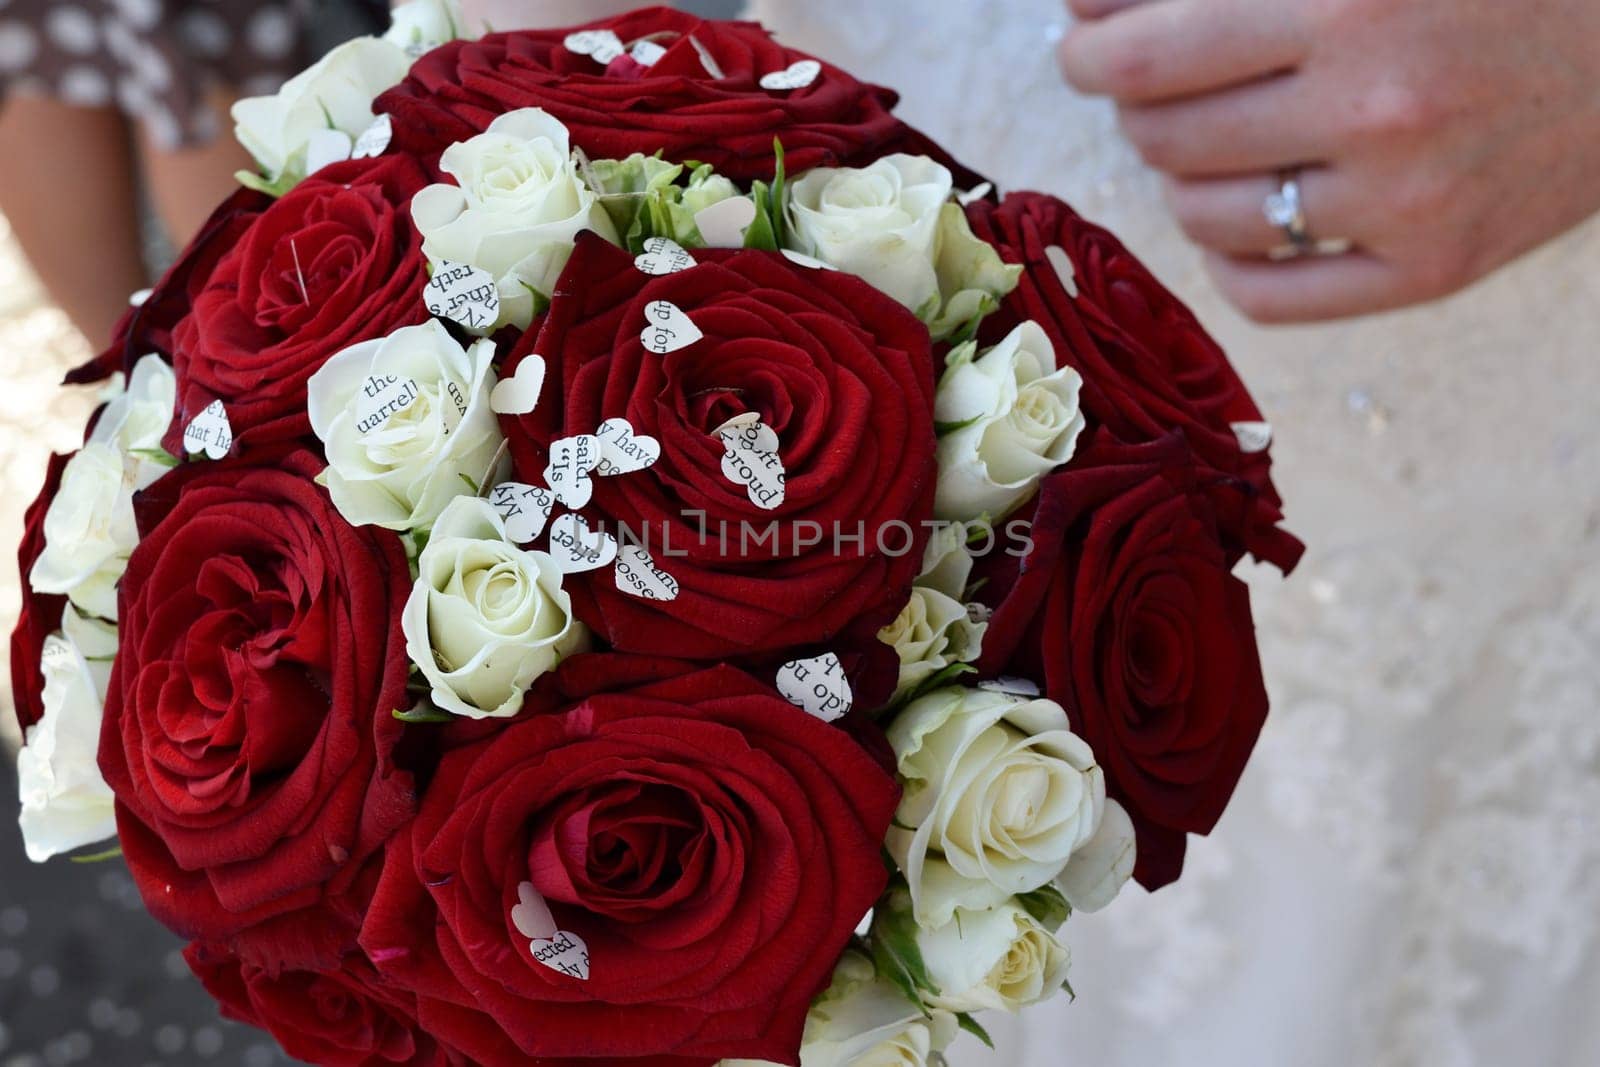 A close-up of a bridal bouquet featuring red and white roses with small heart-shaped paper cutouts scattered among the flowers. The bride's hand, wearing a wedding ring, is visible holding the bouquet.